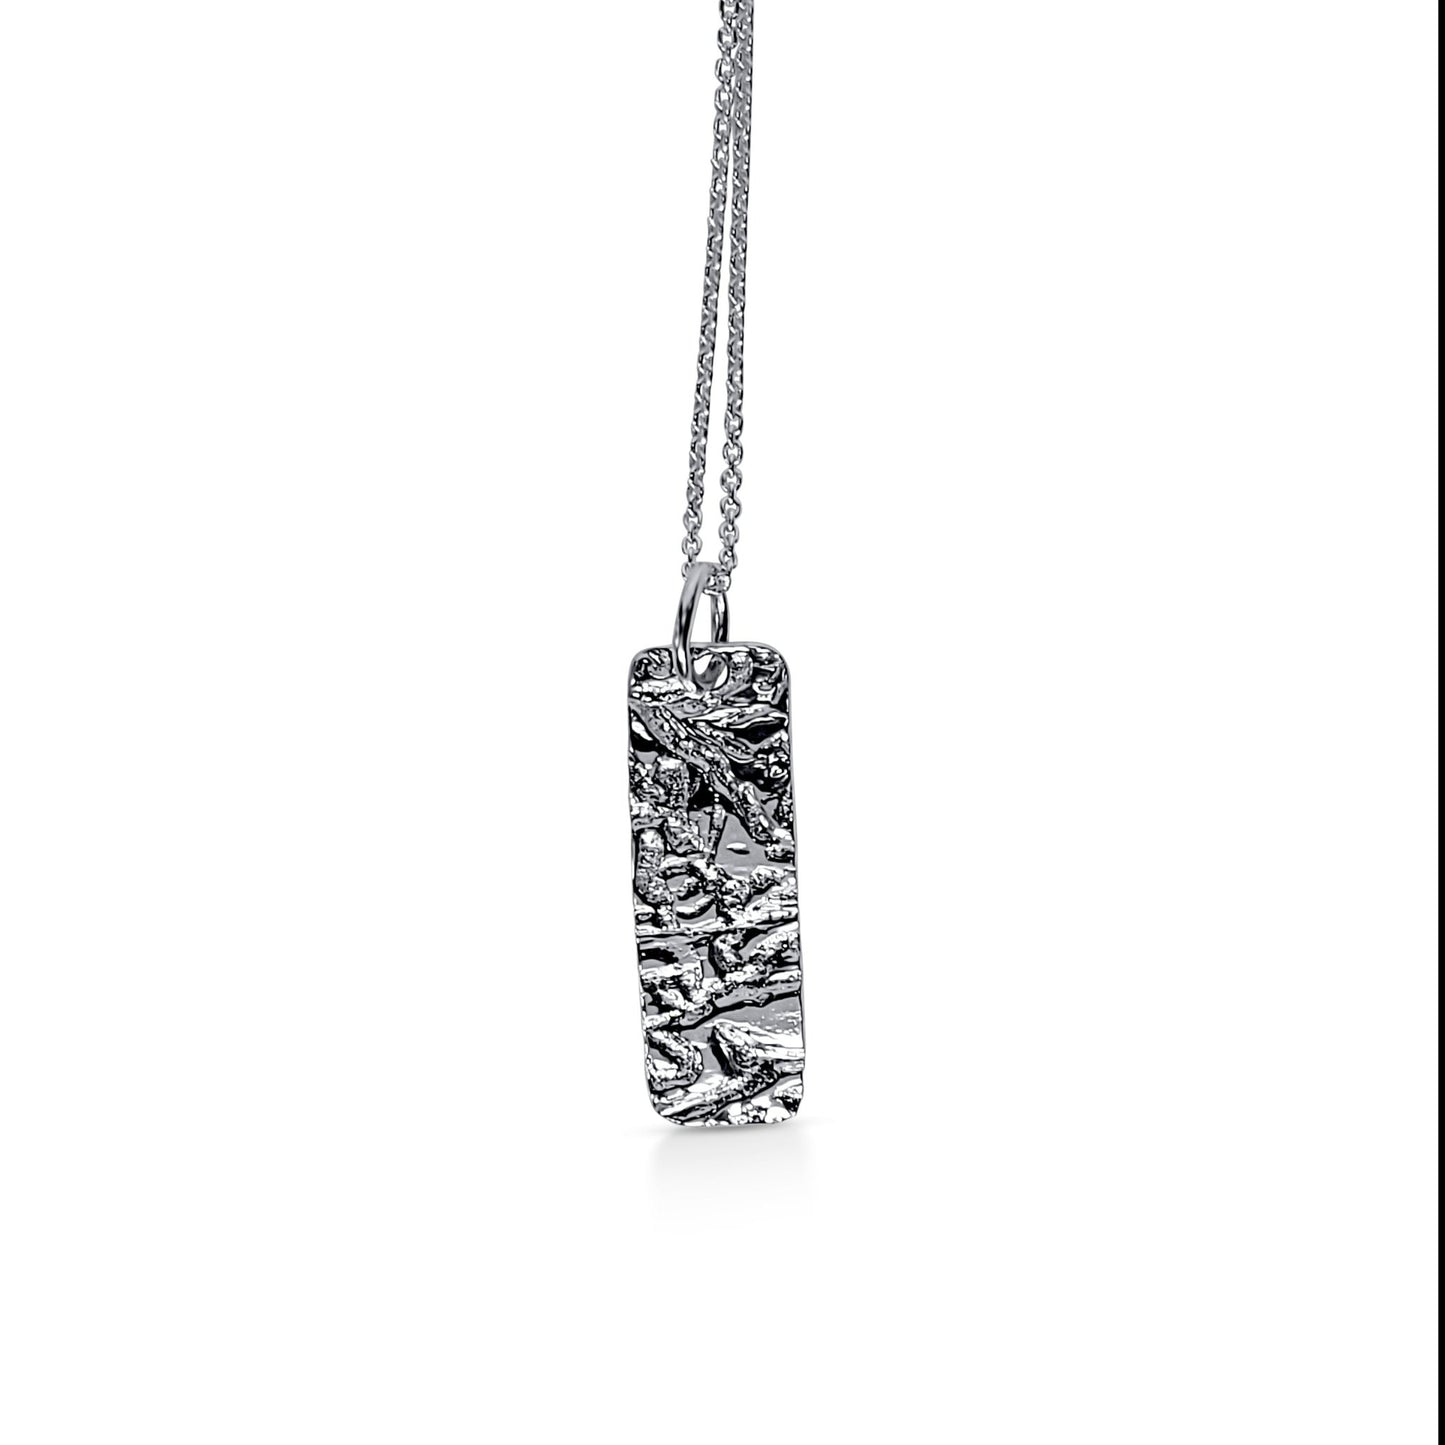 silver rectangle pendat with drift wood texture and cable chain necklace